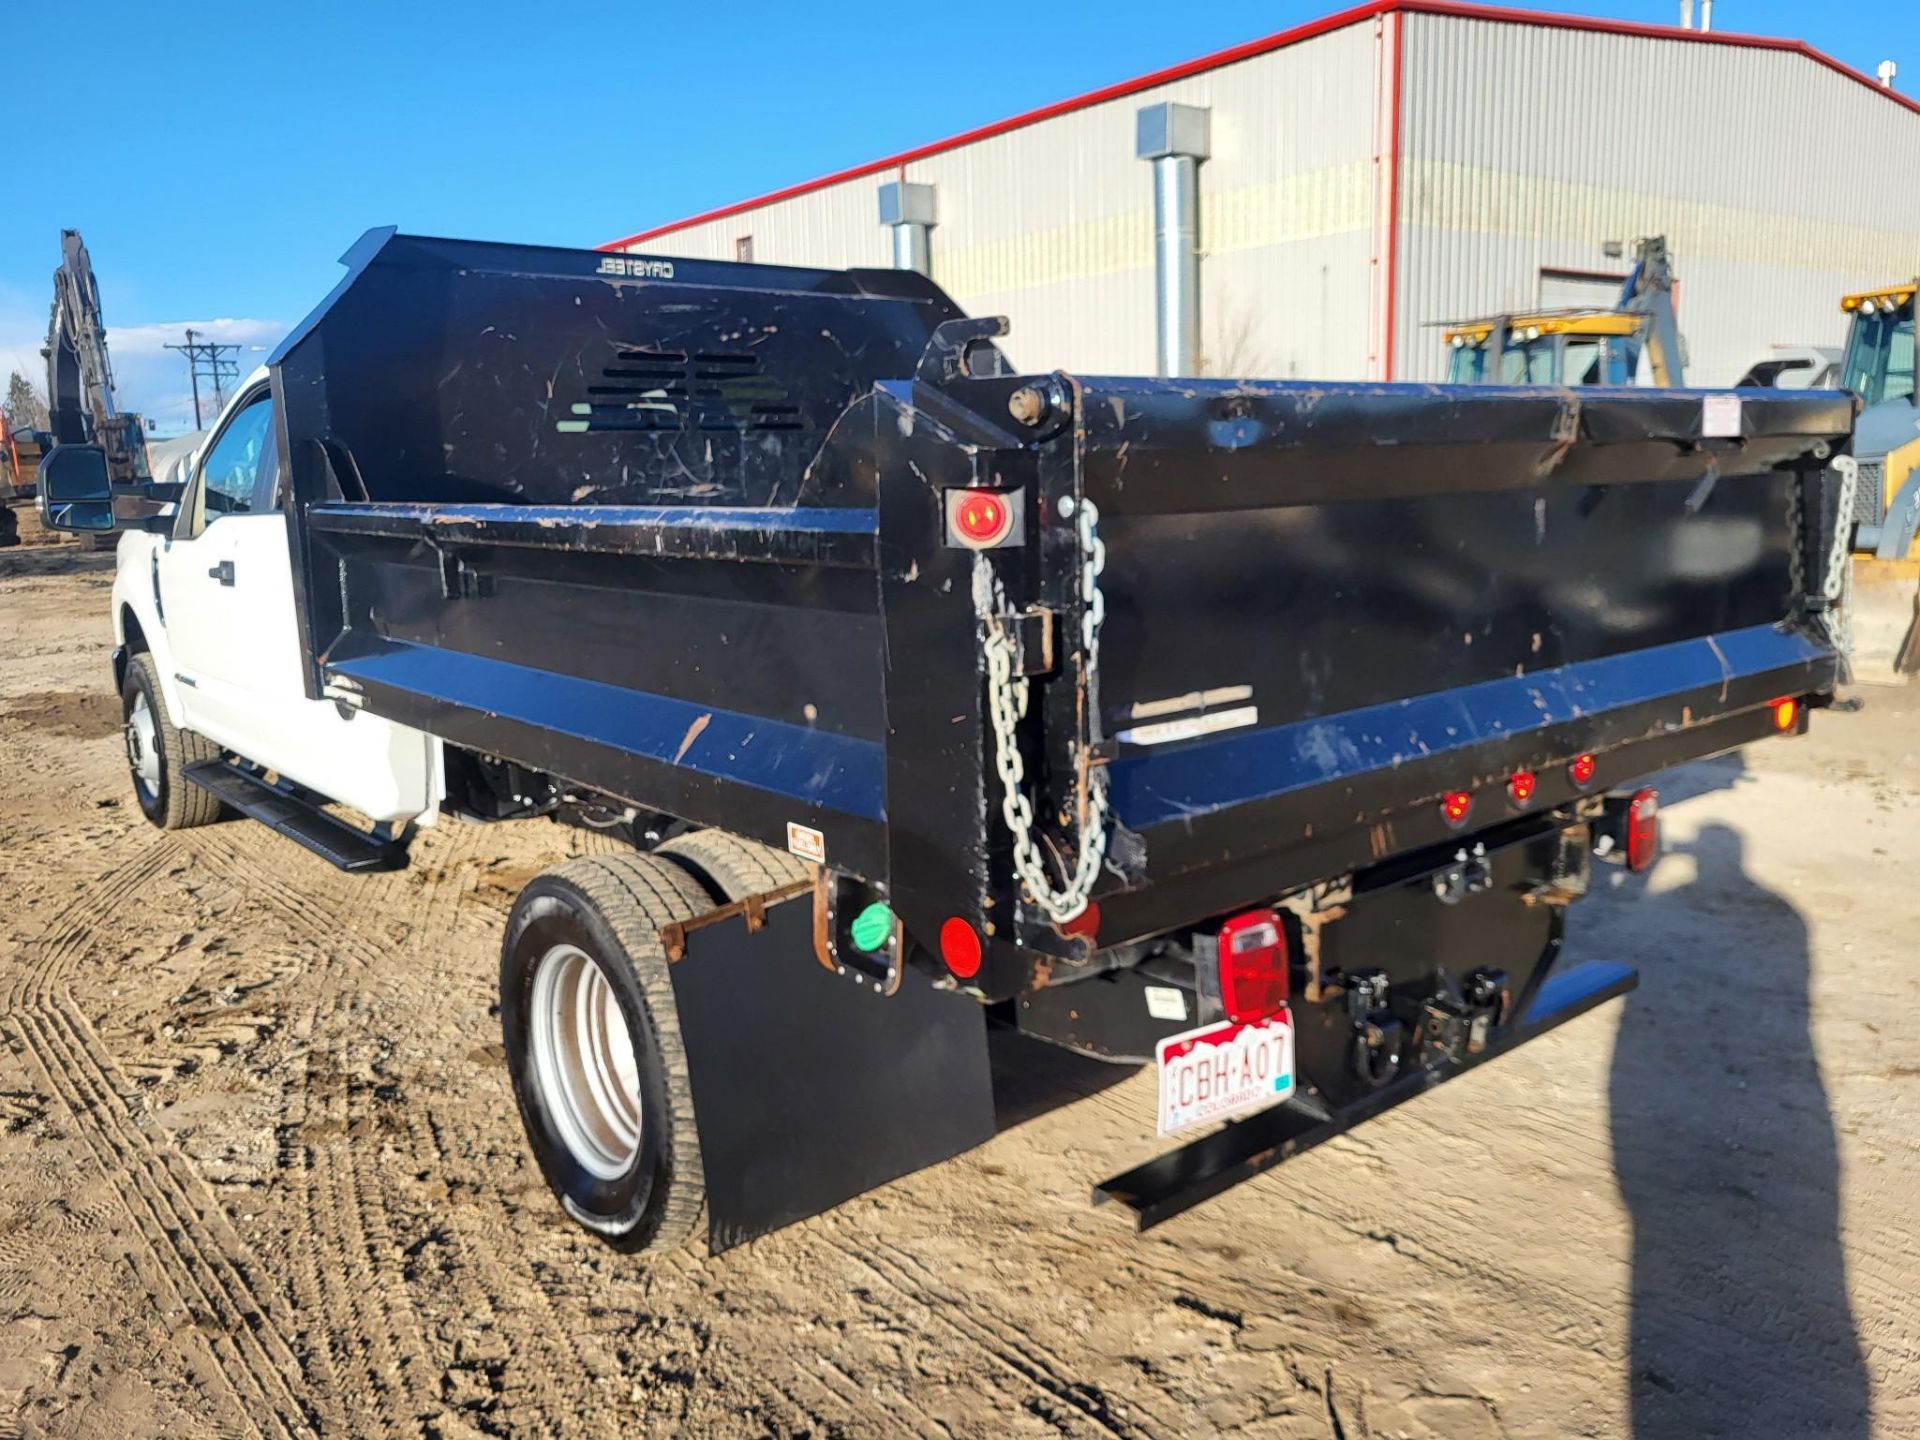 2021 FORD F350 CREW CAB DUALLY DIESEL FLATBED DUMP TRUCK 19,500 MILES! - Image 10 of 37